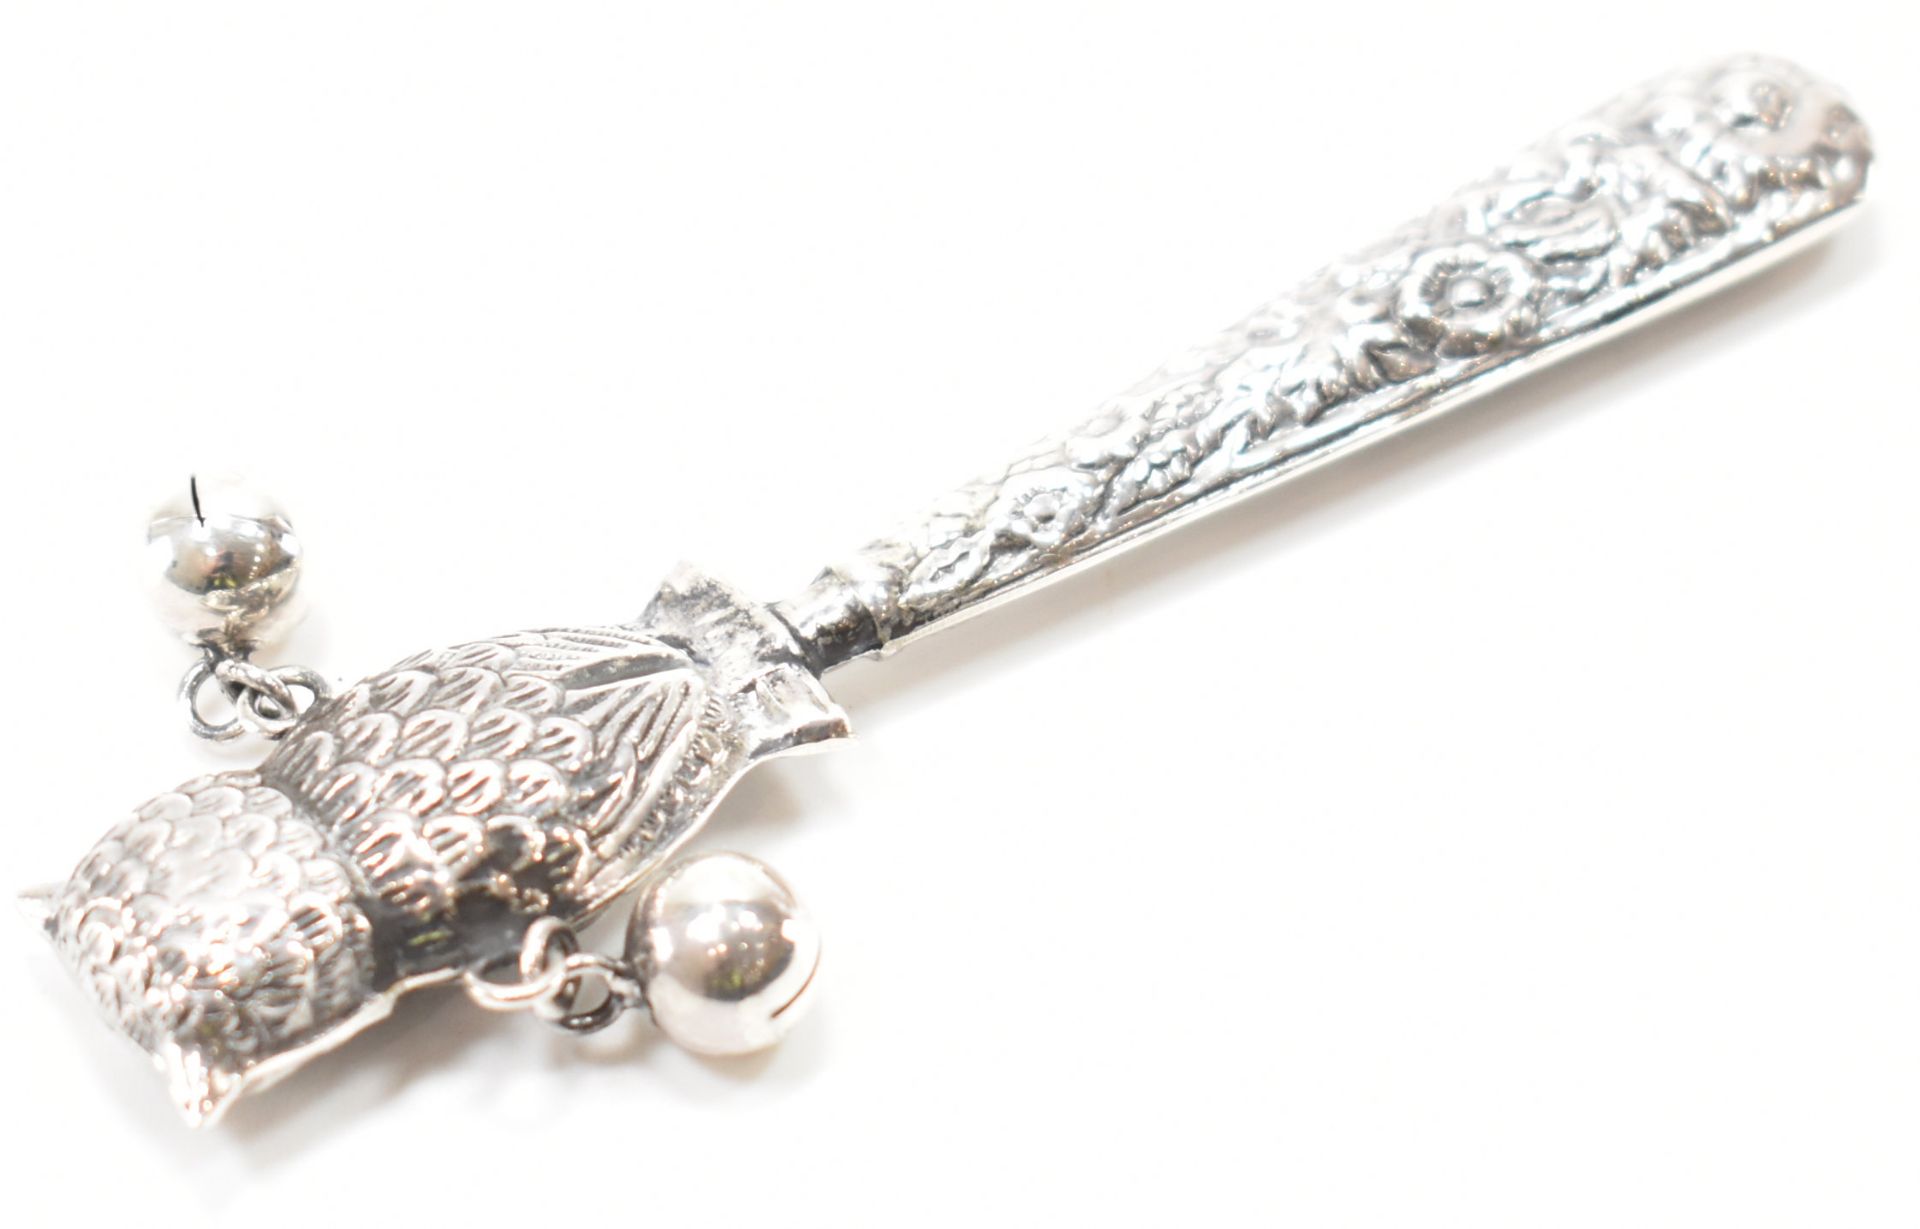 SILVER OWL BABY RATTLE - Image 3 of 4